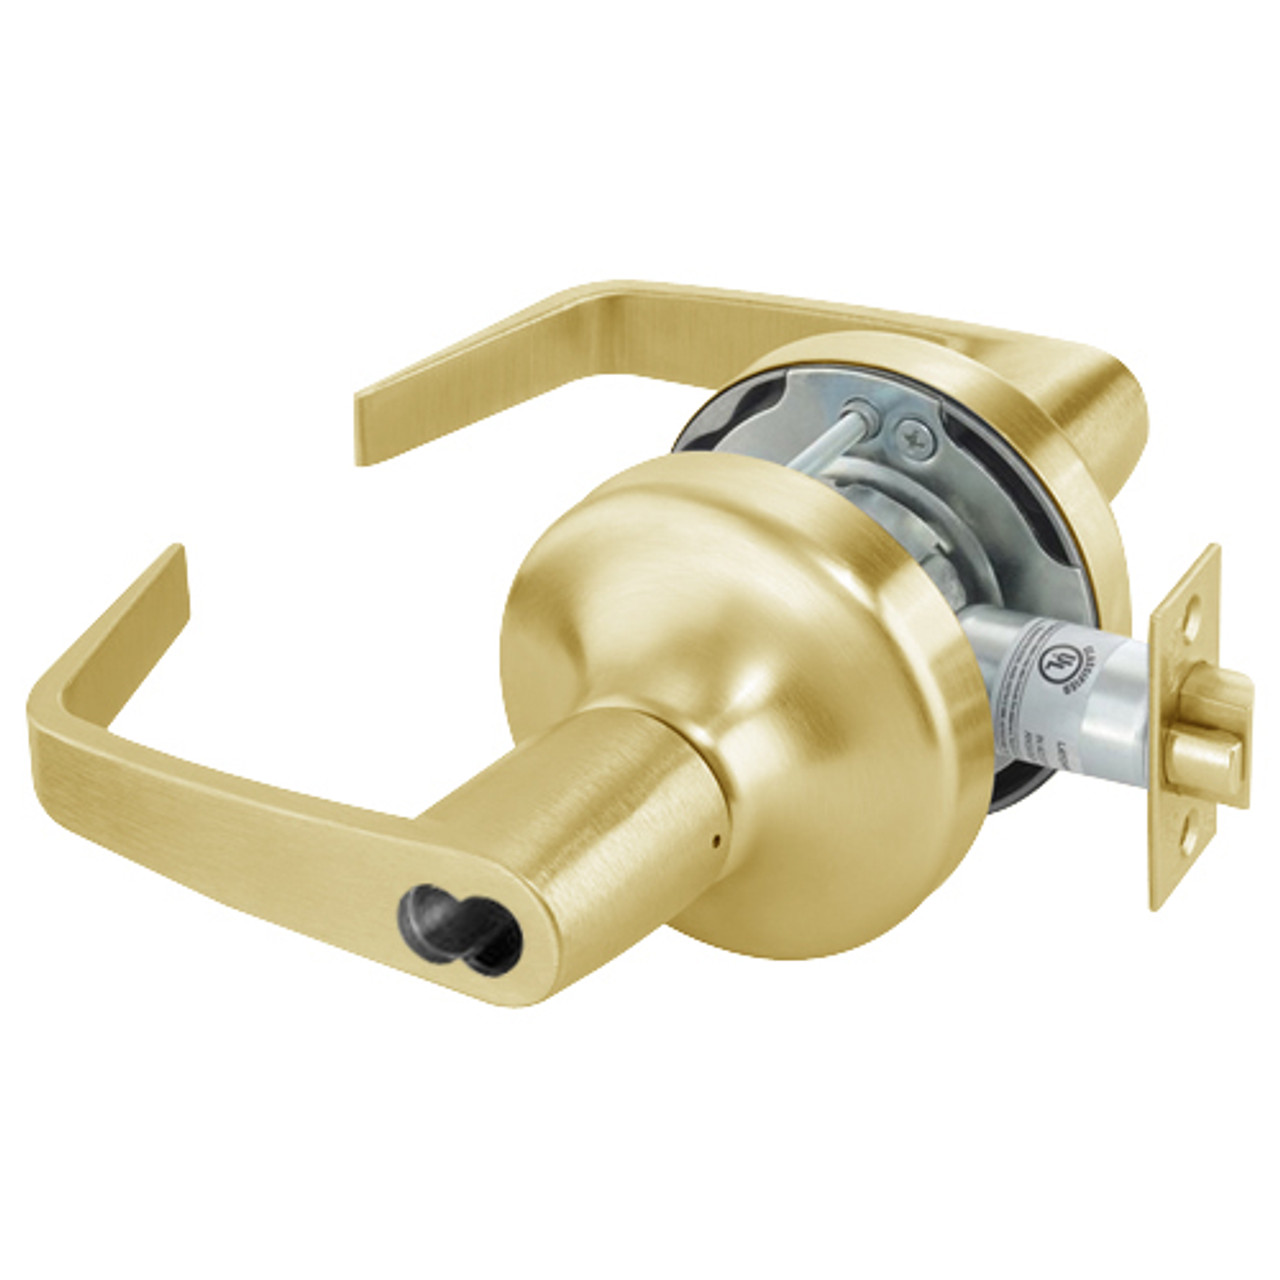 M-AU4707LN-605 Yale 4700LN Series Single Cylinder Entry Cylindrical Lock with Augusta Lever Prepped for Medeco-ASSA IC Core in Bright Brass